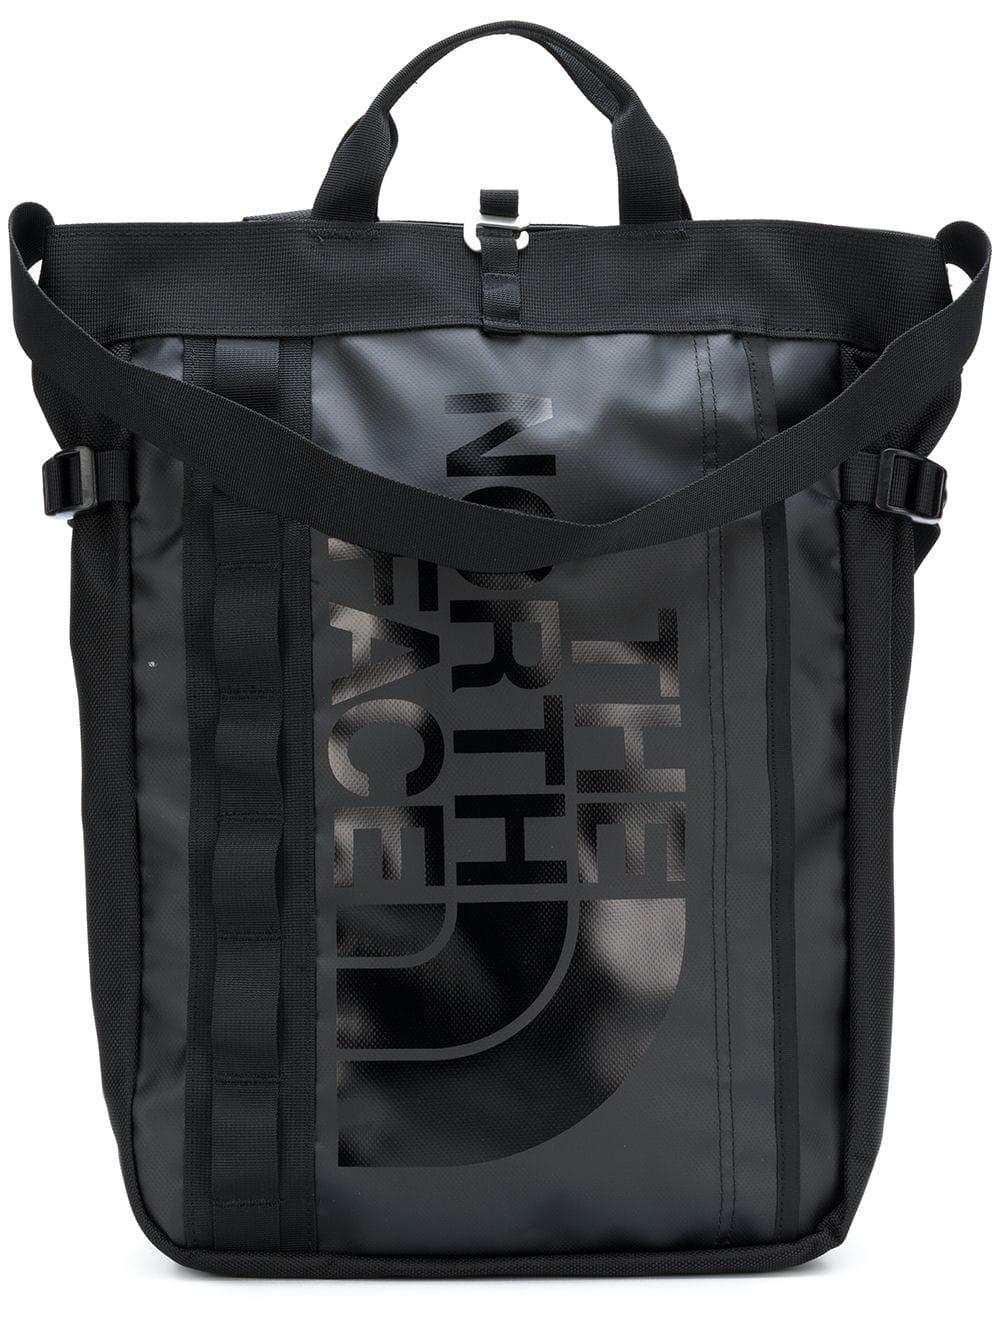 The North Face Synthetic Base Camp Tote Bag in Black for Men - Lyst